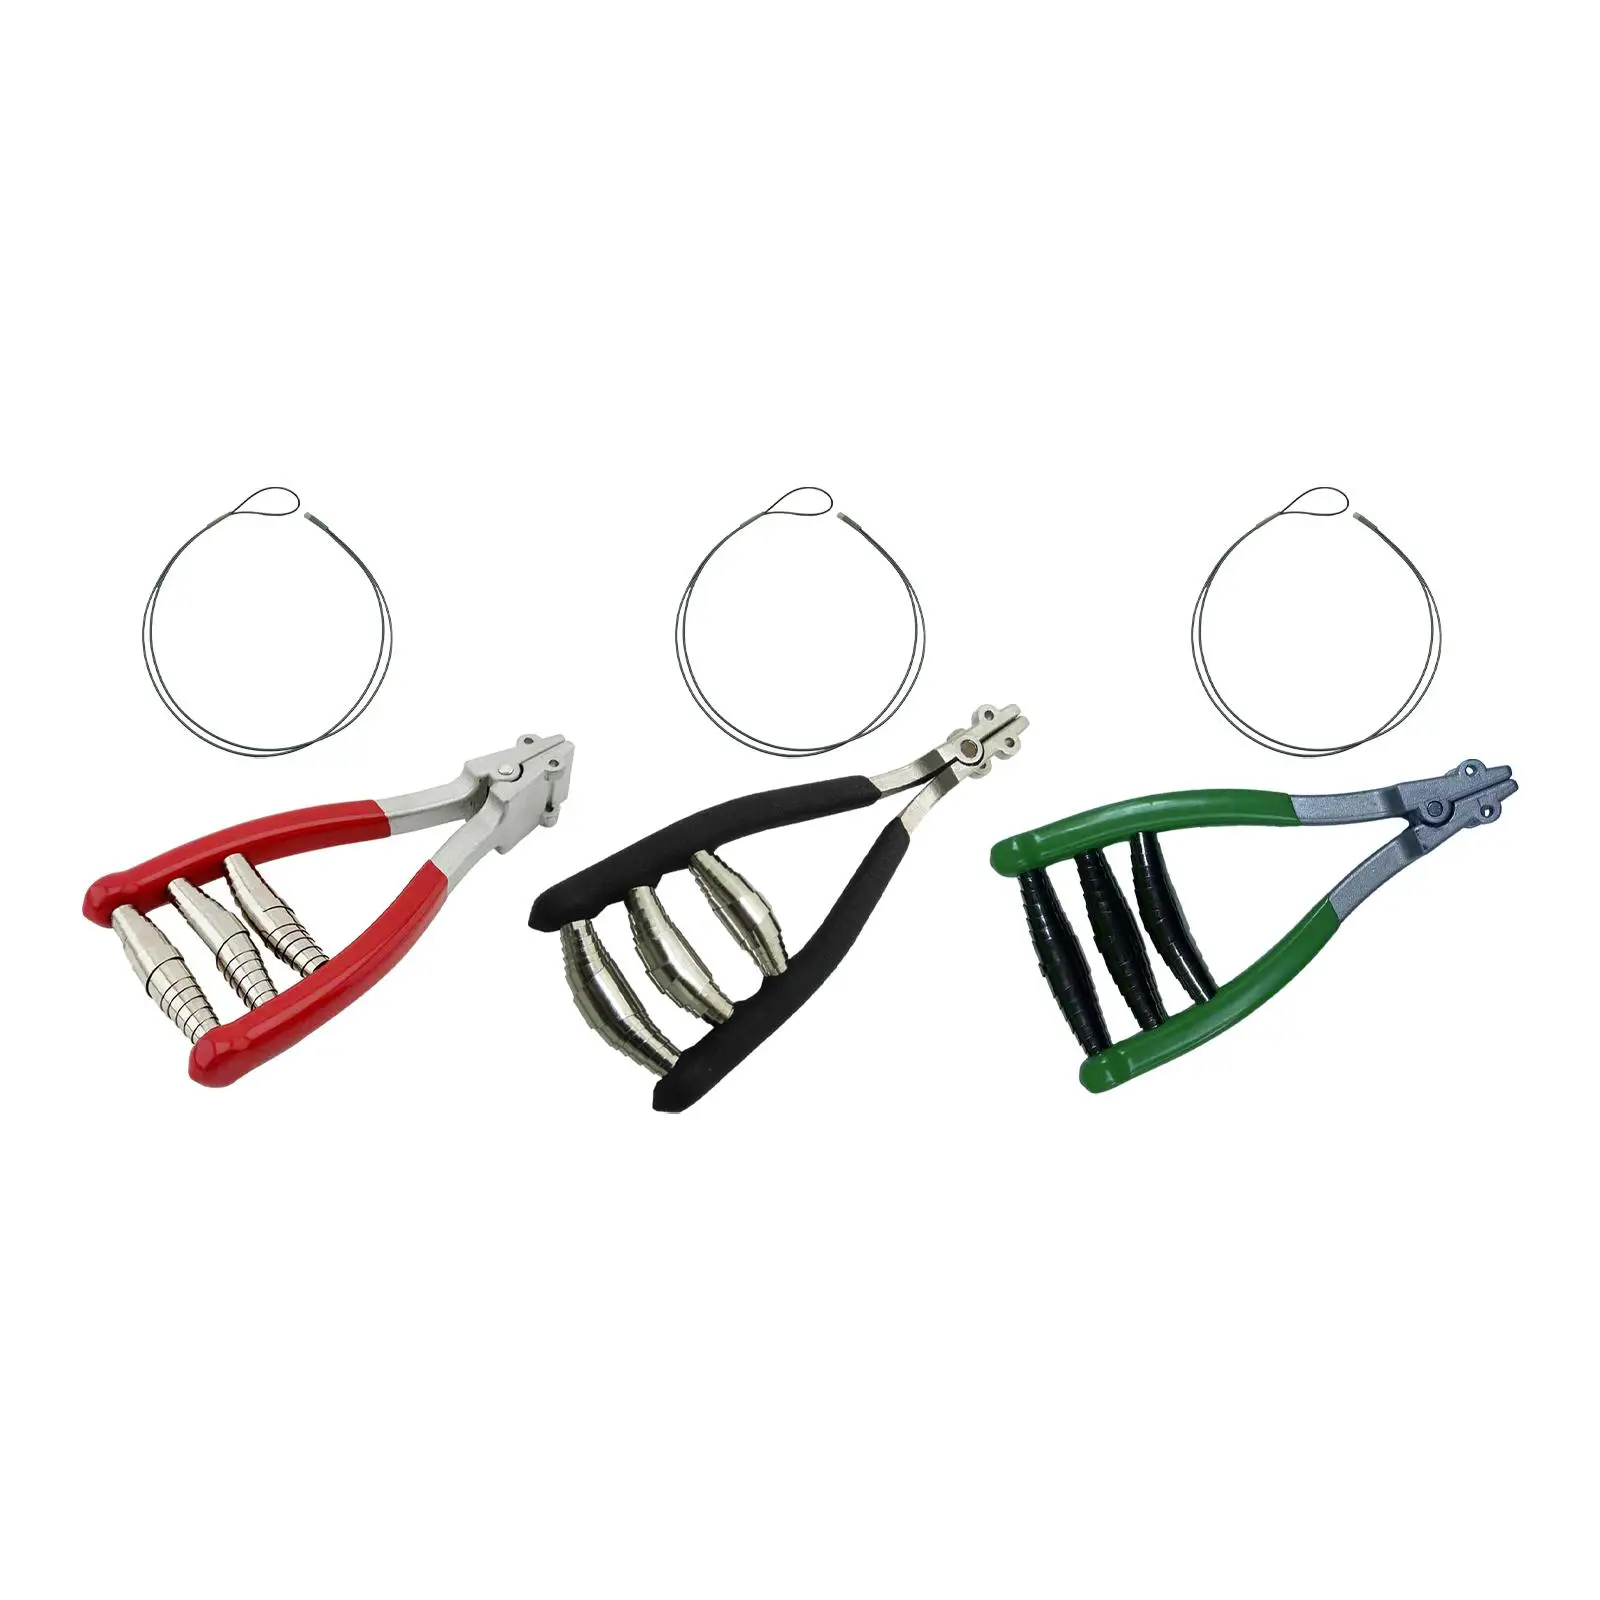 Starting Clamp Professional Stringing Clamp Durable Sports Alloy Portable Tennis Equipment Stringing Tool for Tennis Squash